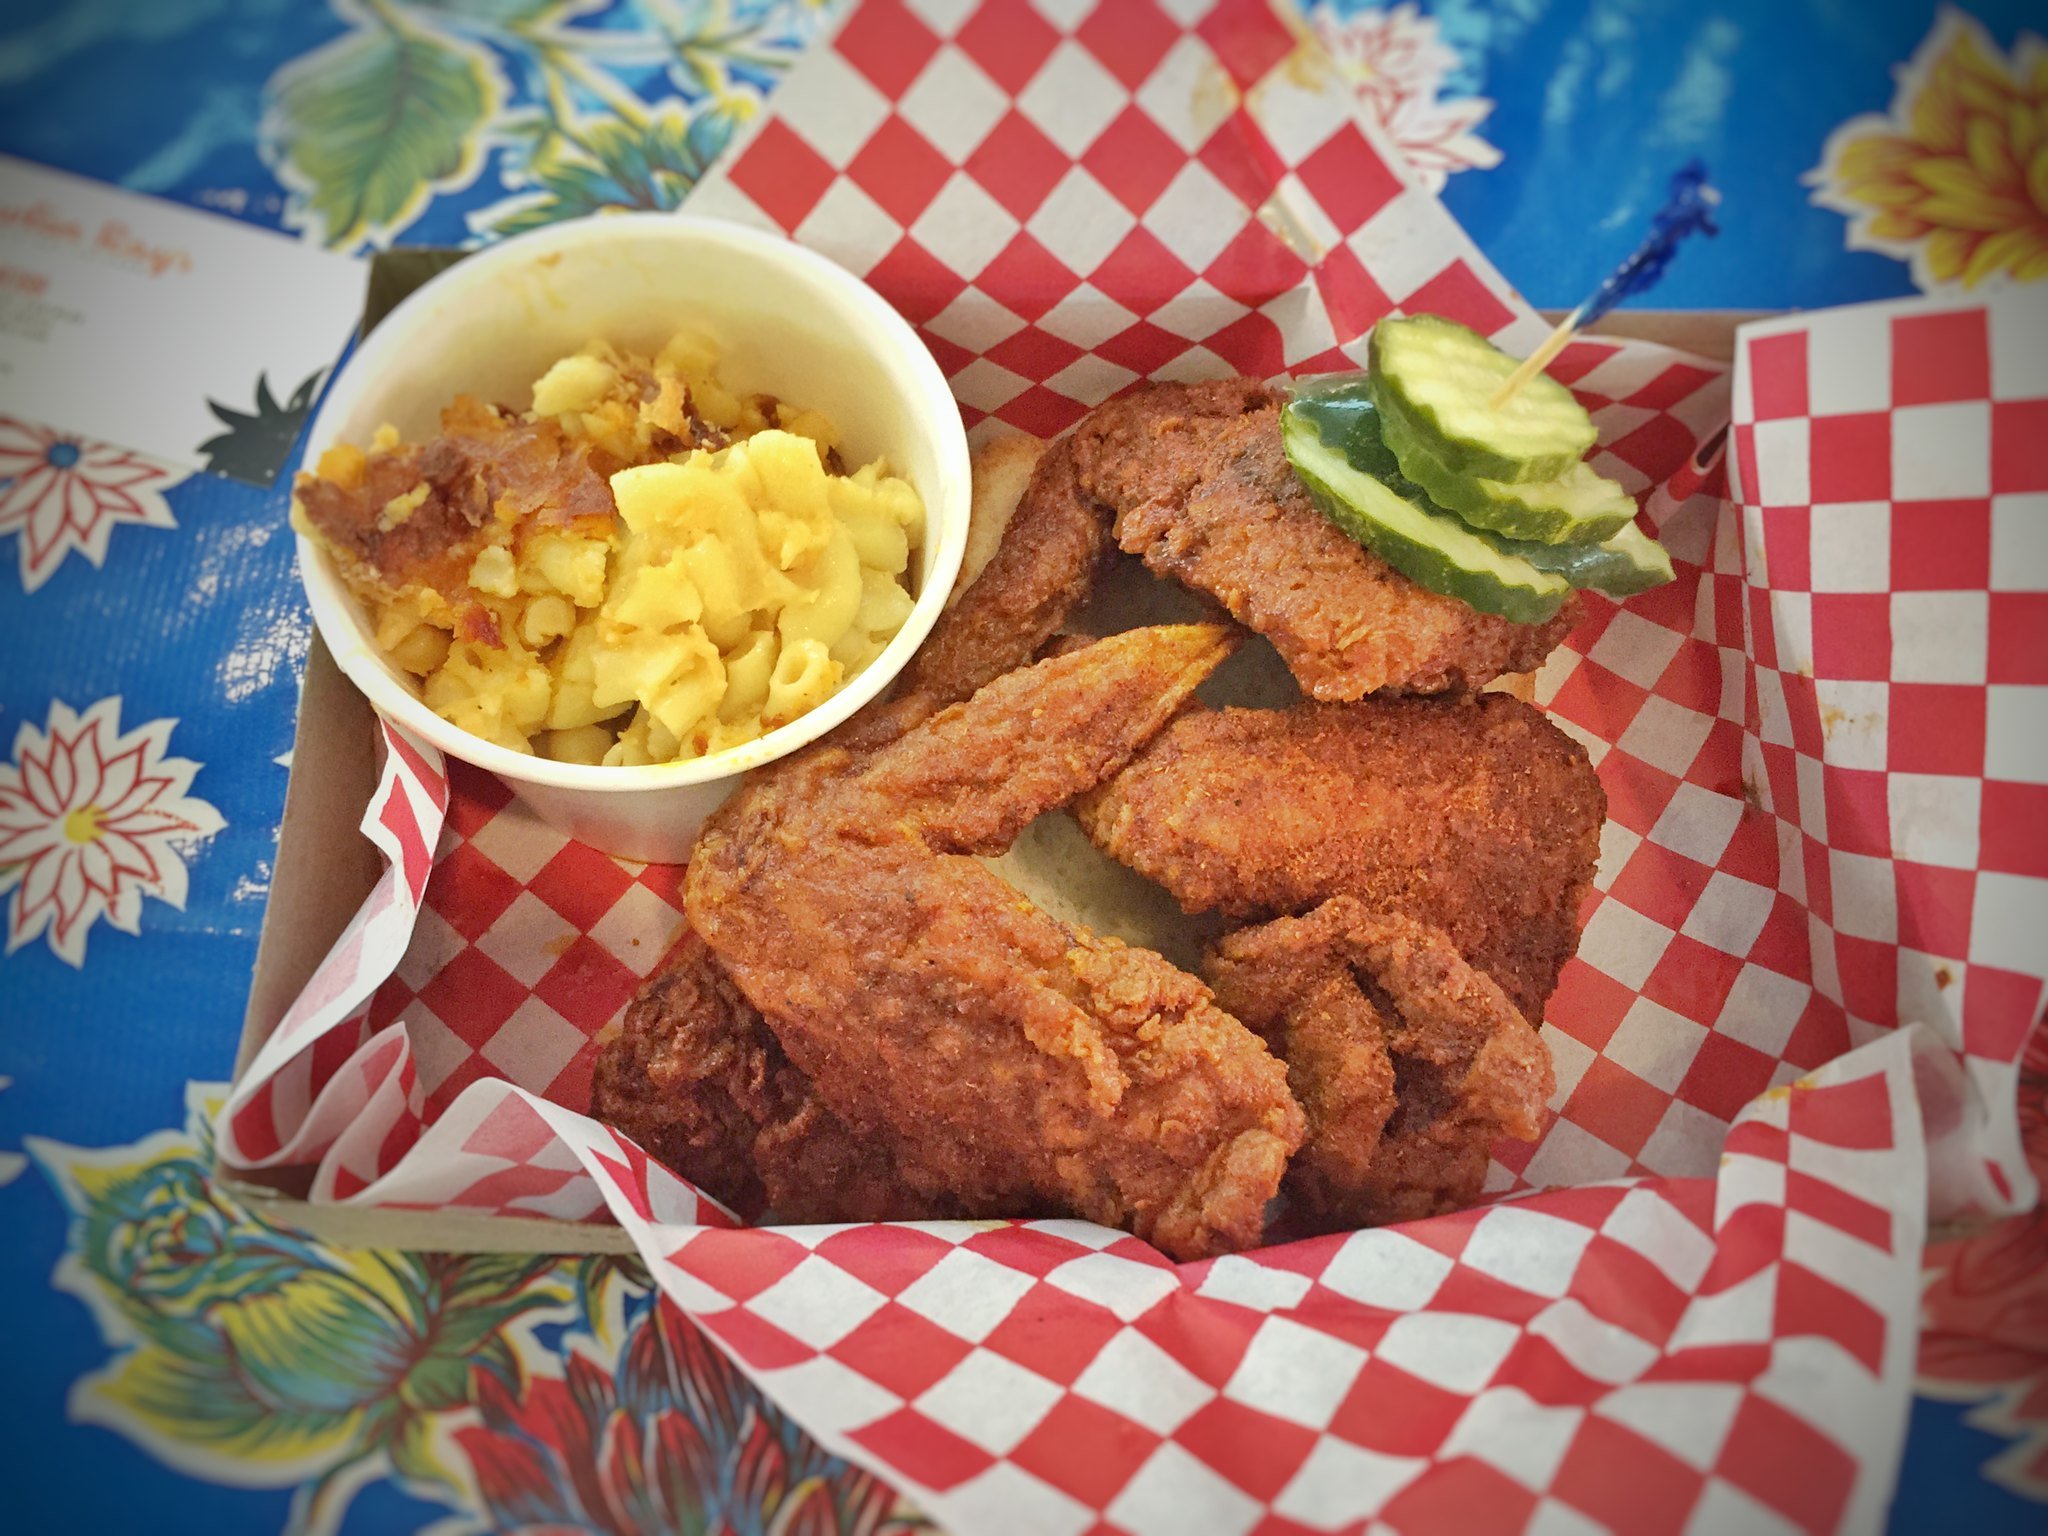 Basket of chicken and Mac and Cheese from Howlin' Ray's